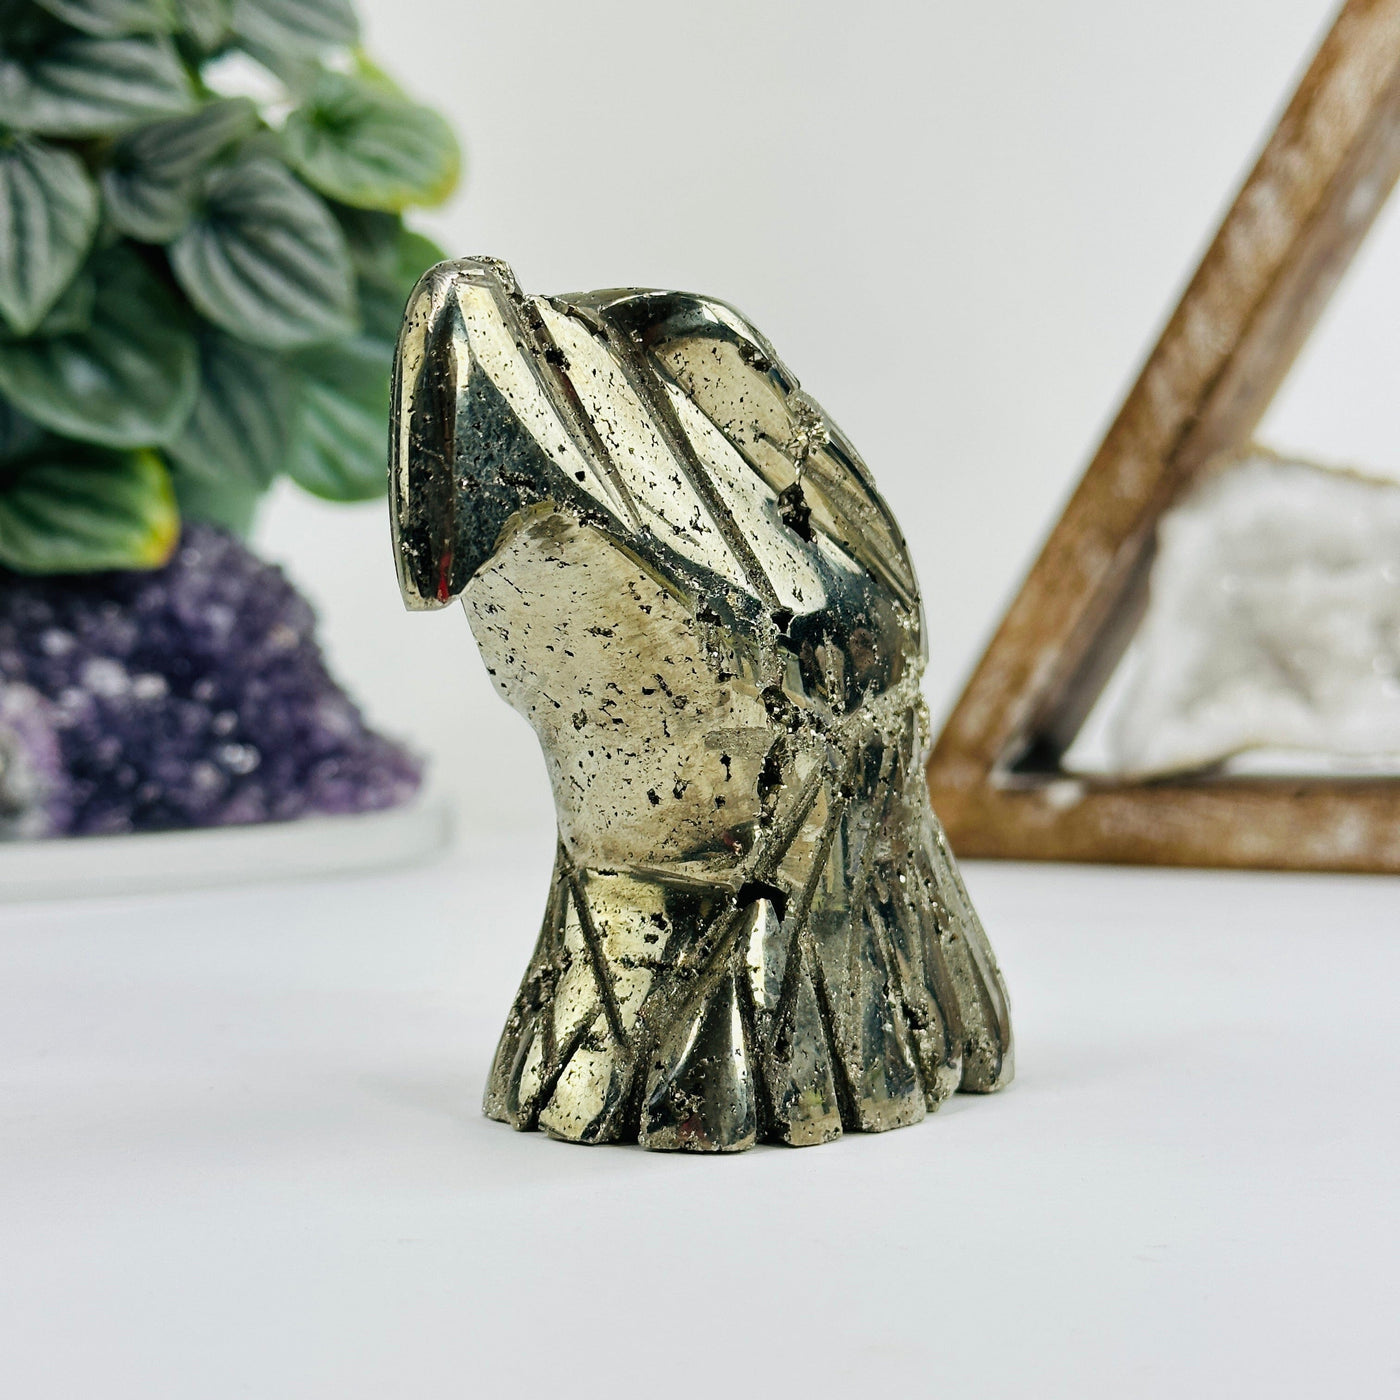 Pyrite eagle head with decorations in the background